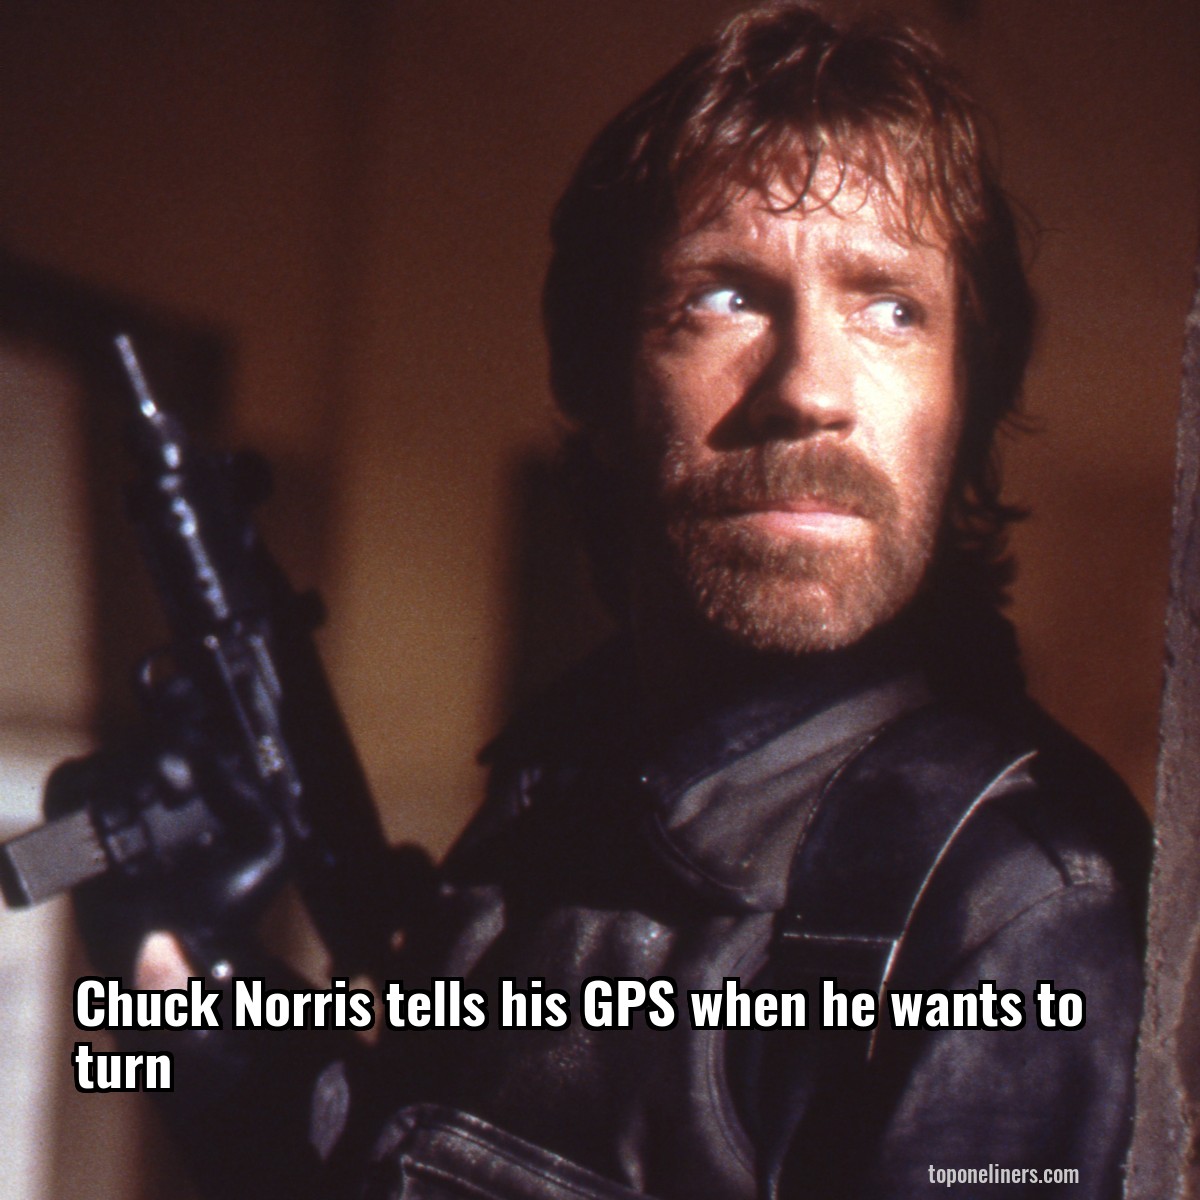 Chuck Norris tells his GPS when he wants to turn